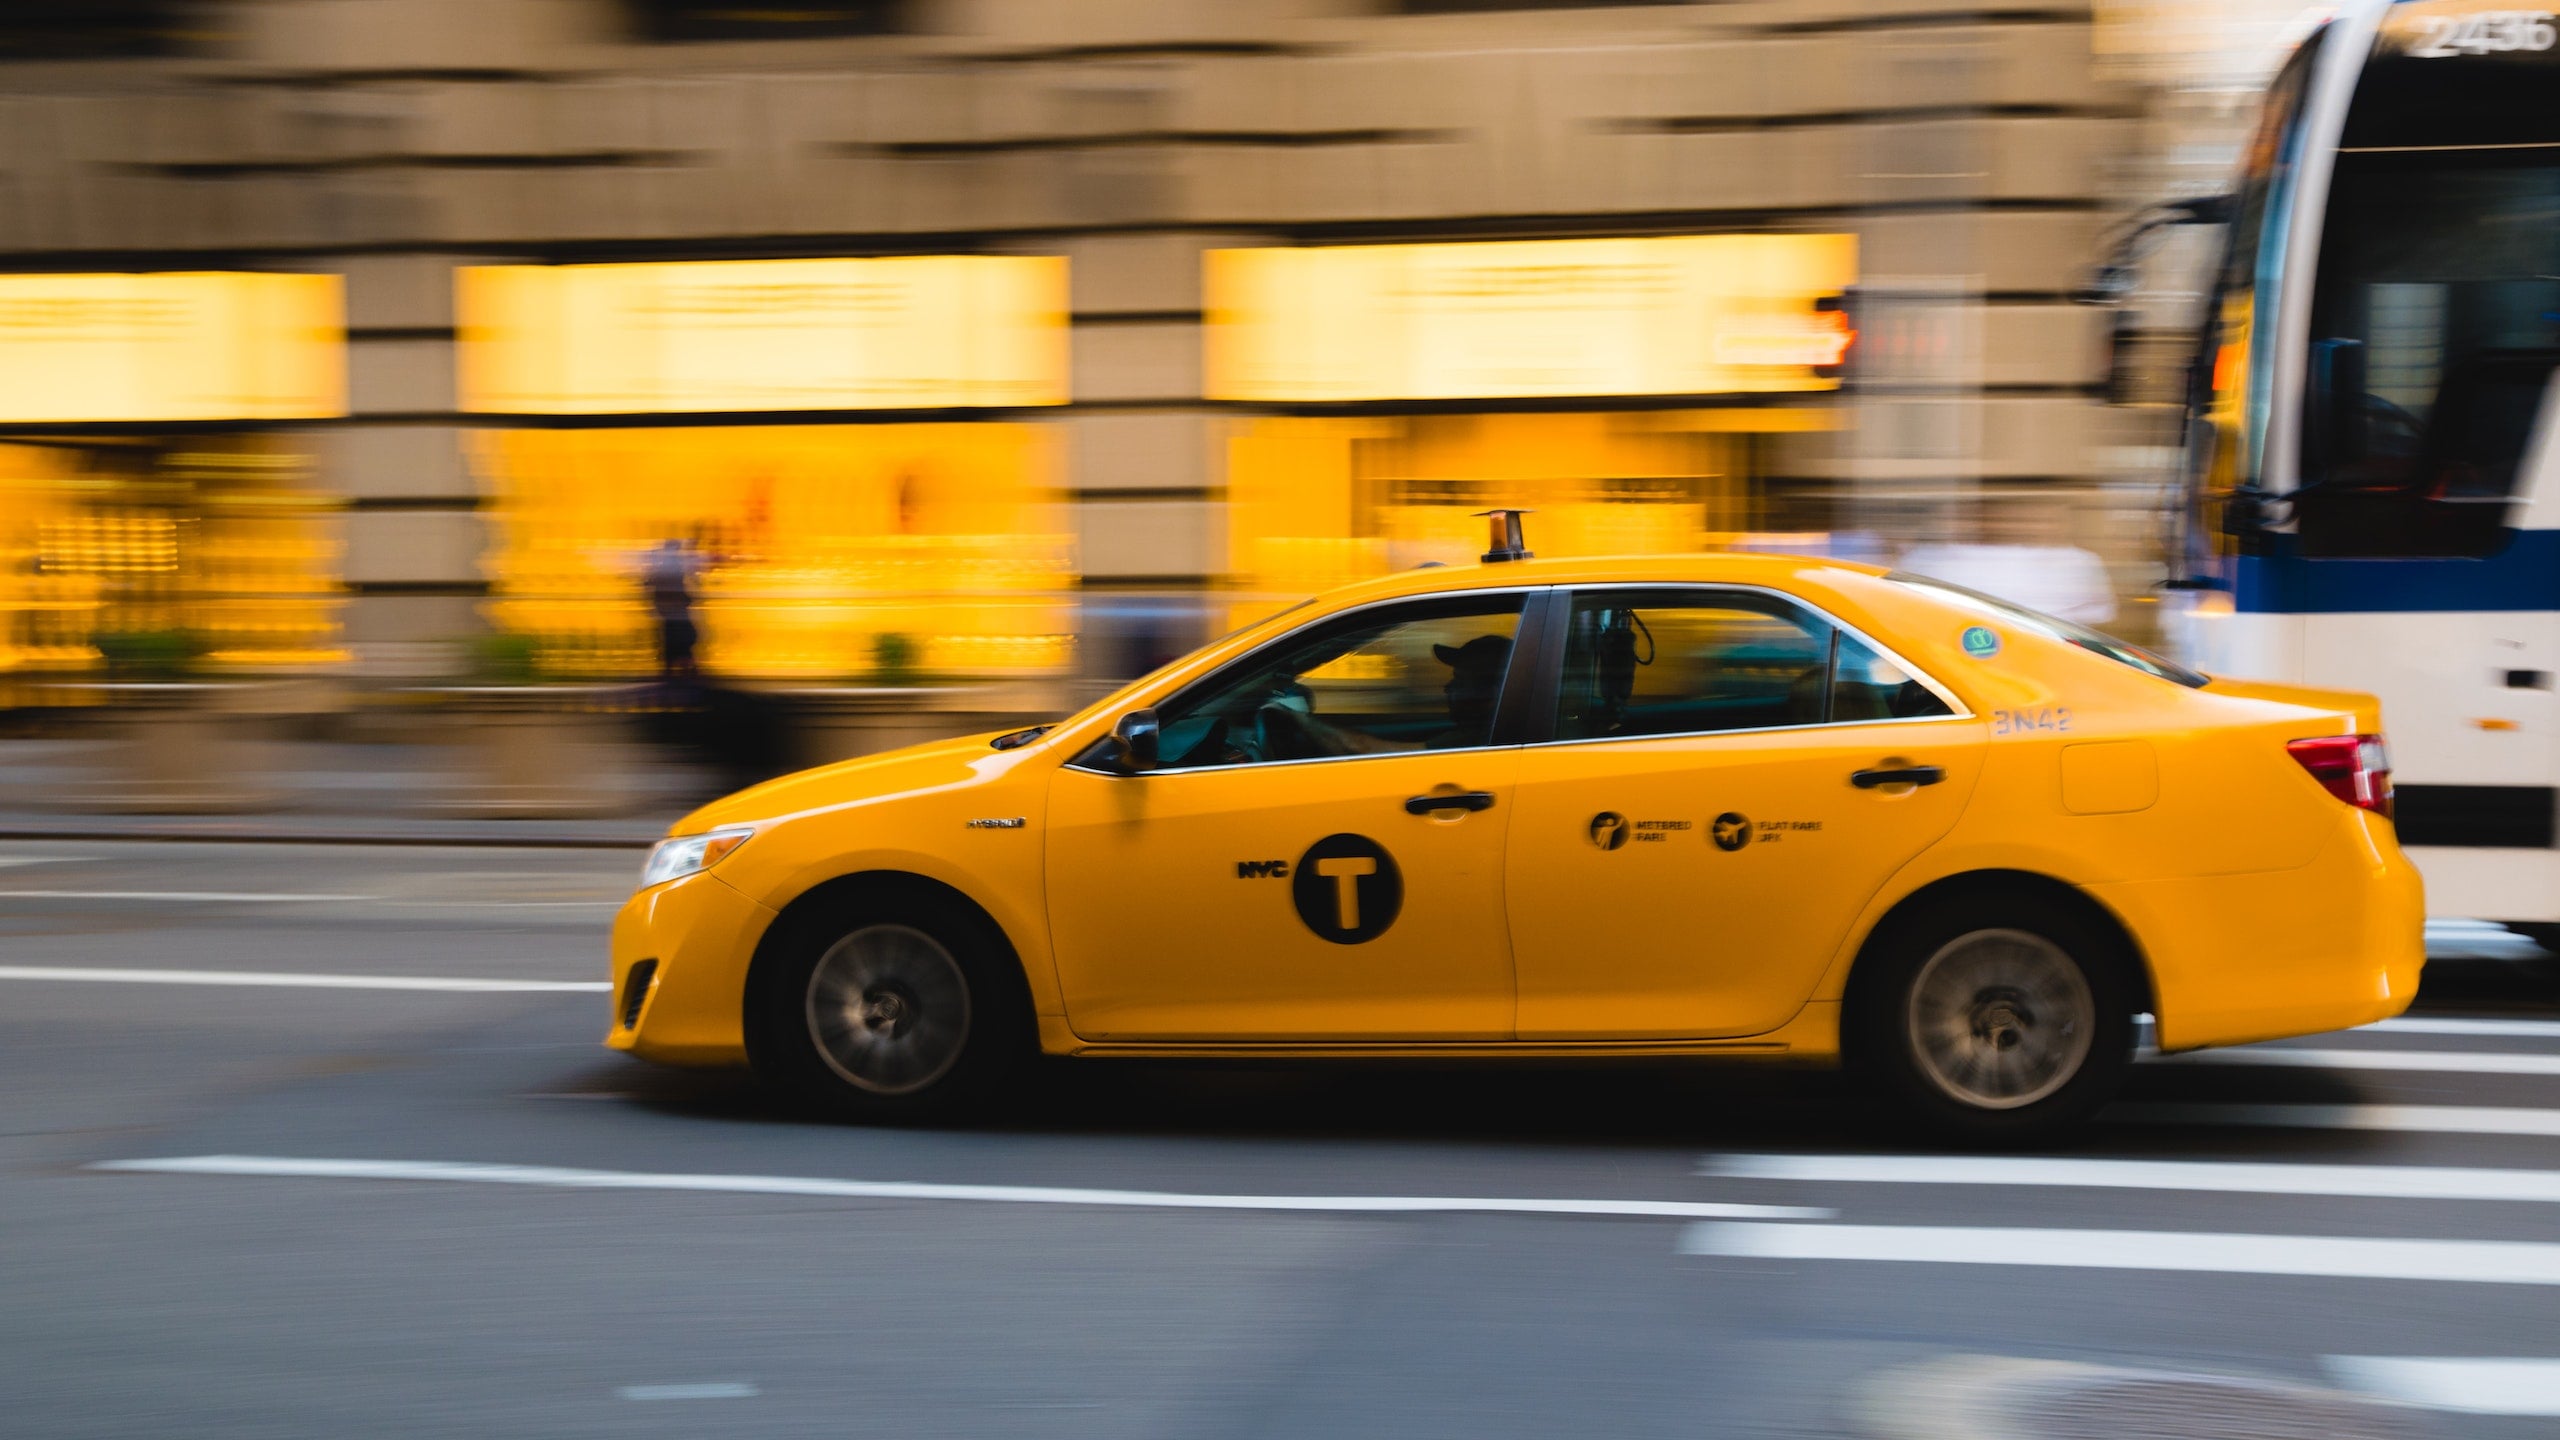 6 things to consider when filing an Uber accident claim